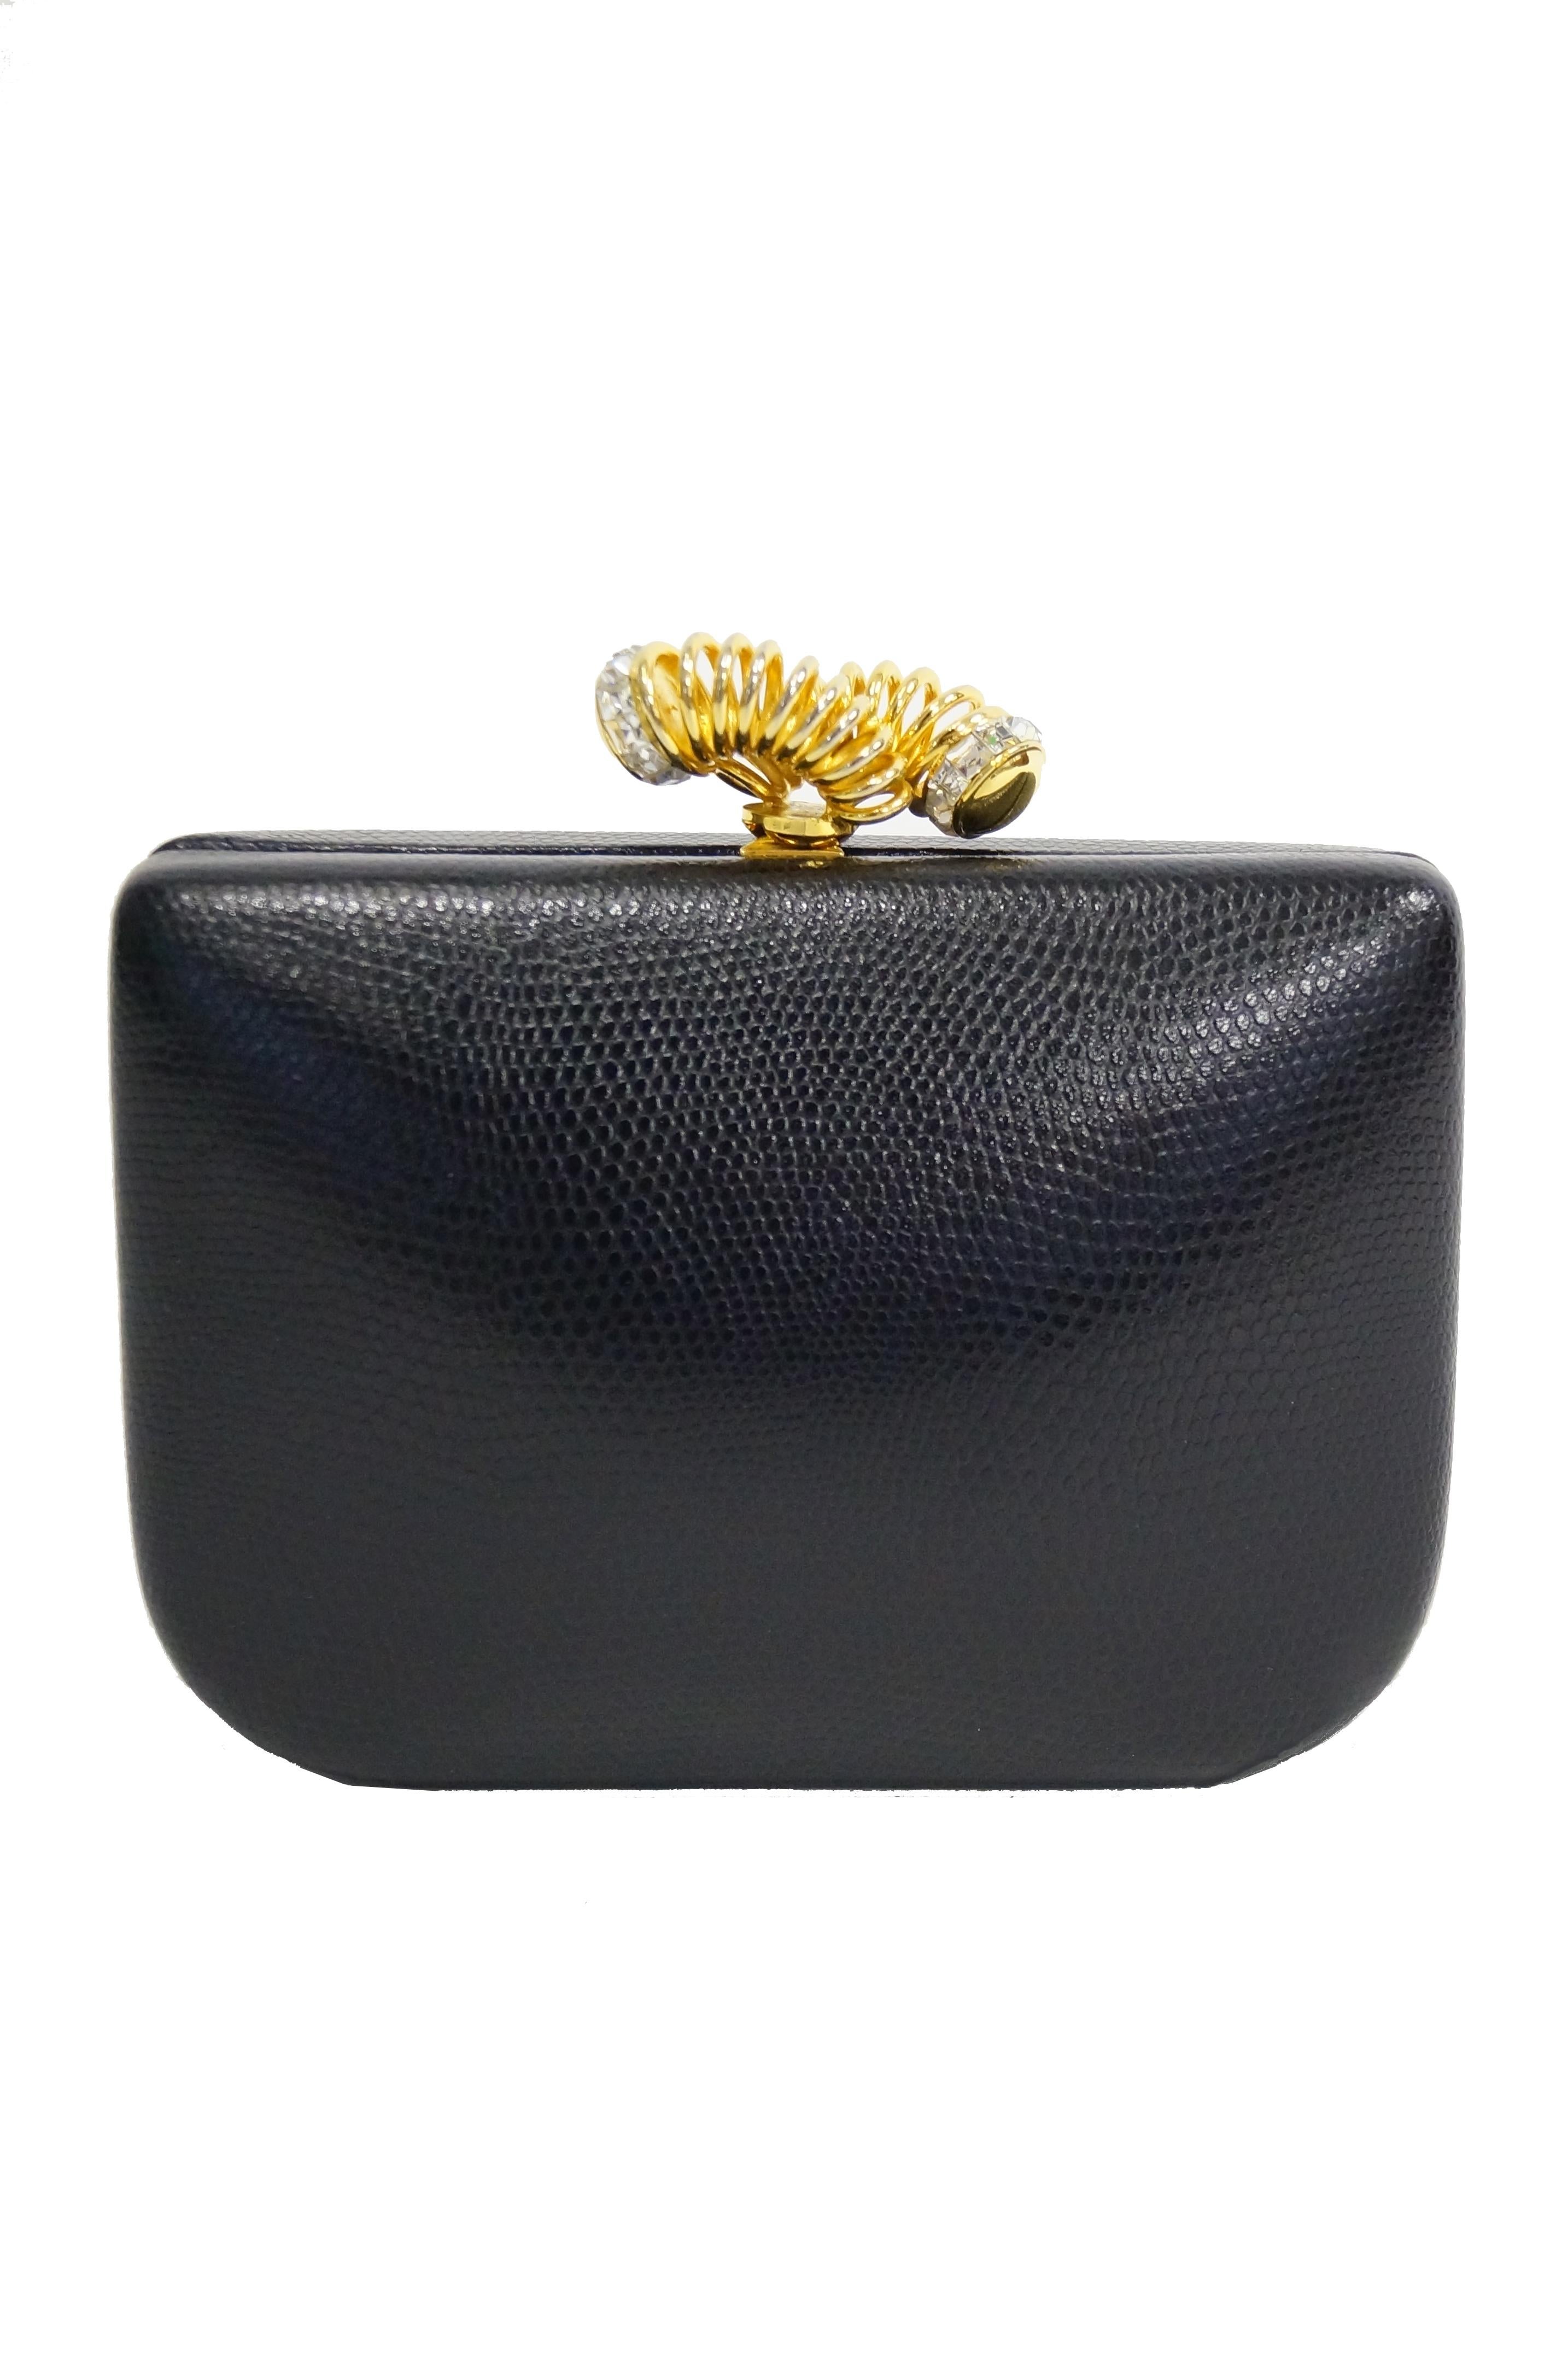 Amazing leather clutch by Rodo! The handbag features a rectangular, rounded edge body with black lizard skin leather body. The fantastic modernist gold tone and rhinestone spring swirl clasp gives way to a surprisingly spacious lined interior,